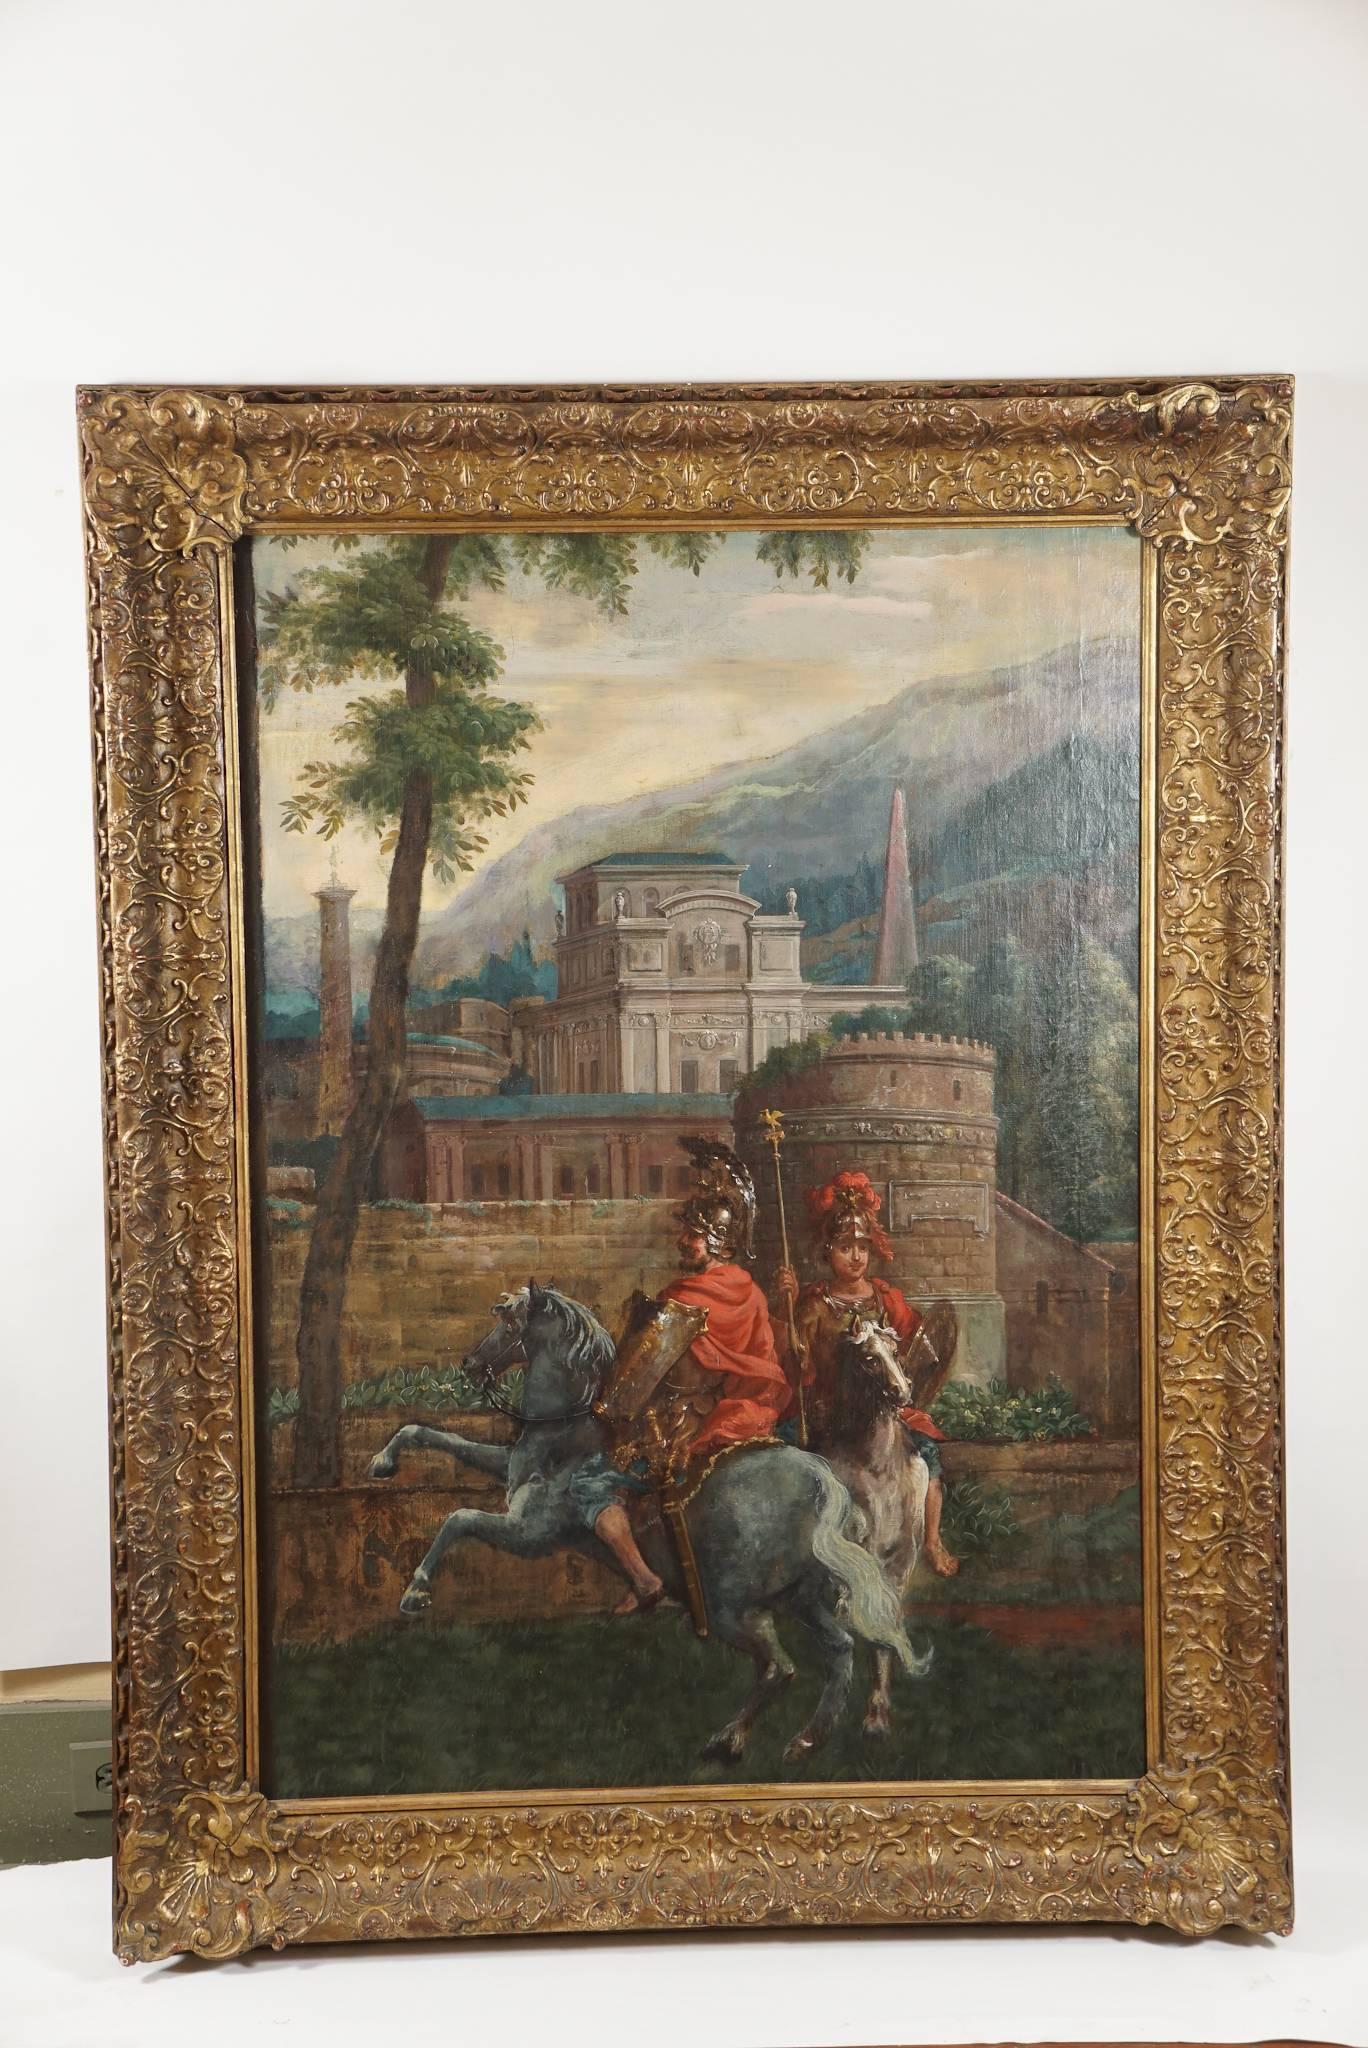 18th-century French school of Hubert Robert oil on canvas painting of large size depicting Roman soldiers on horseback in a neoclassical architectural setting, or 'capriccio', with fortress walls and crenellated tower, baroque style buildings,